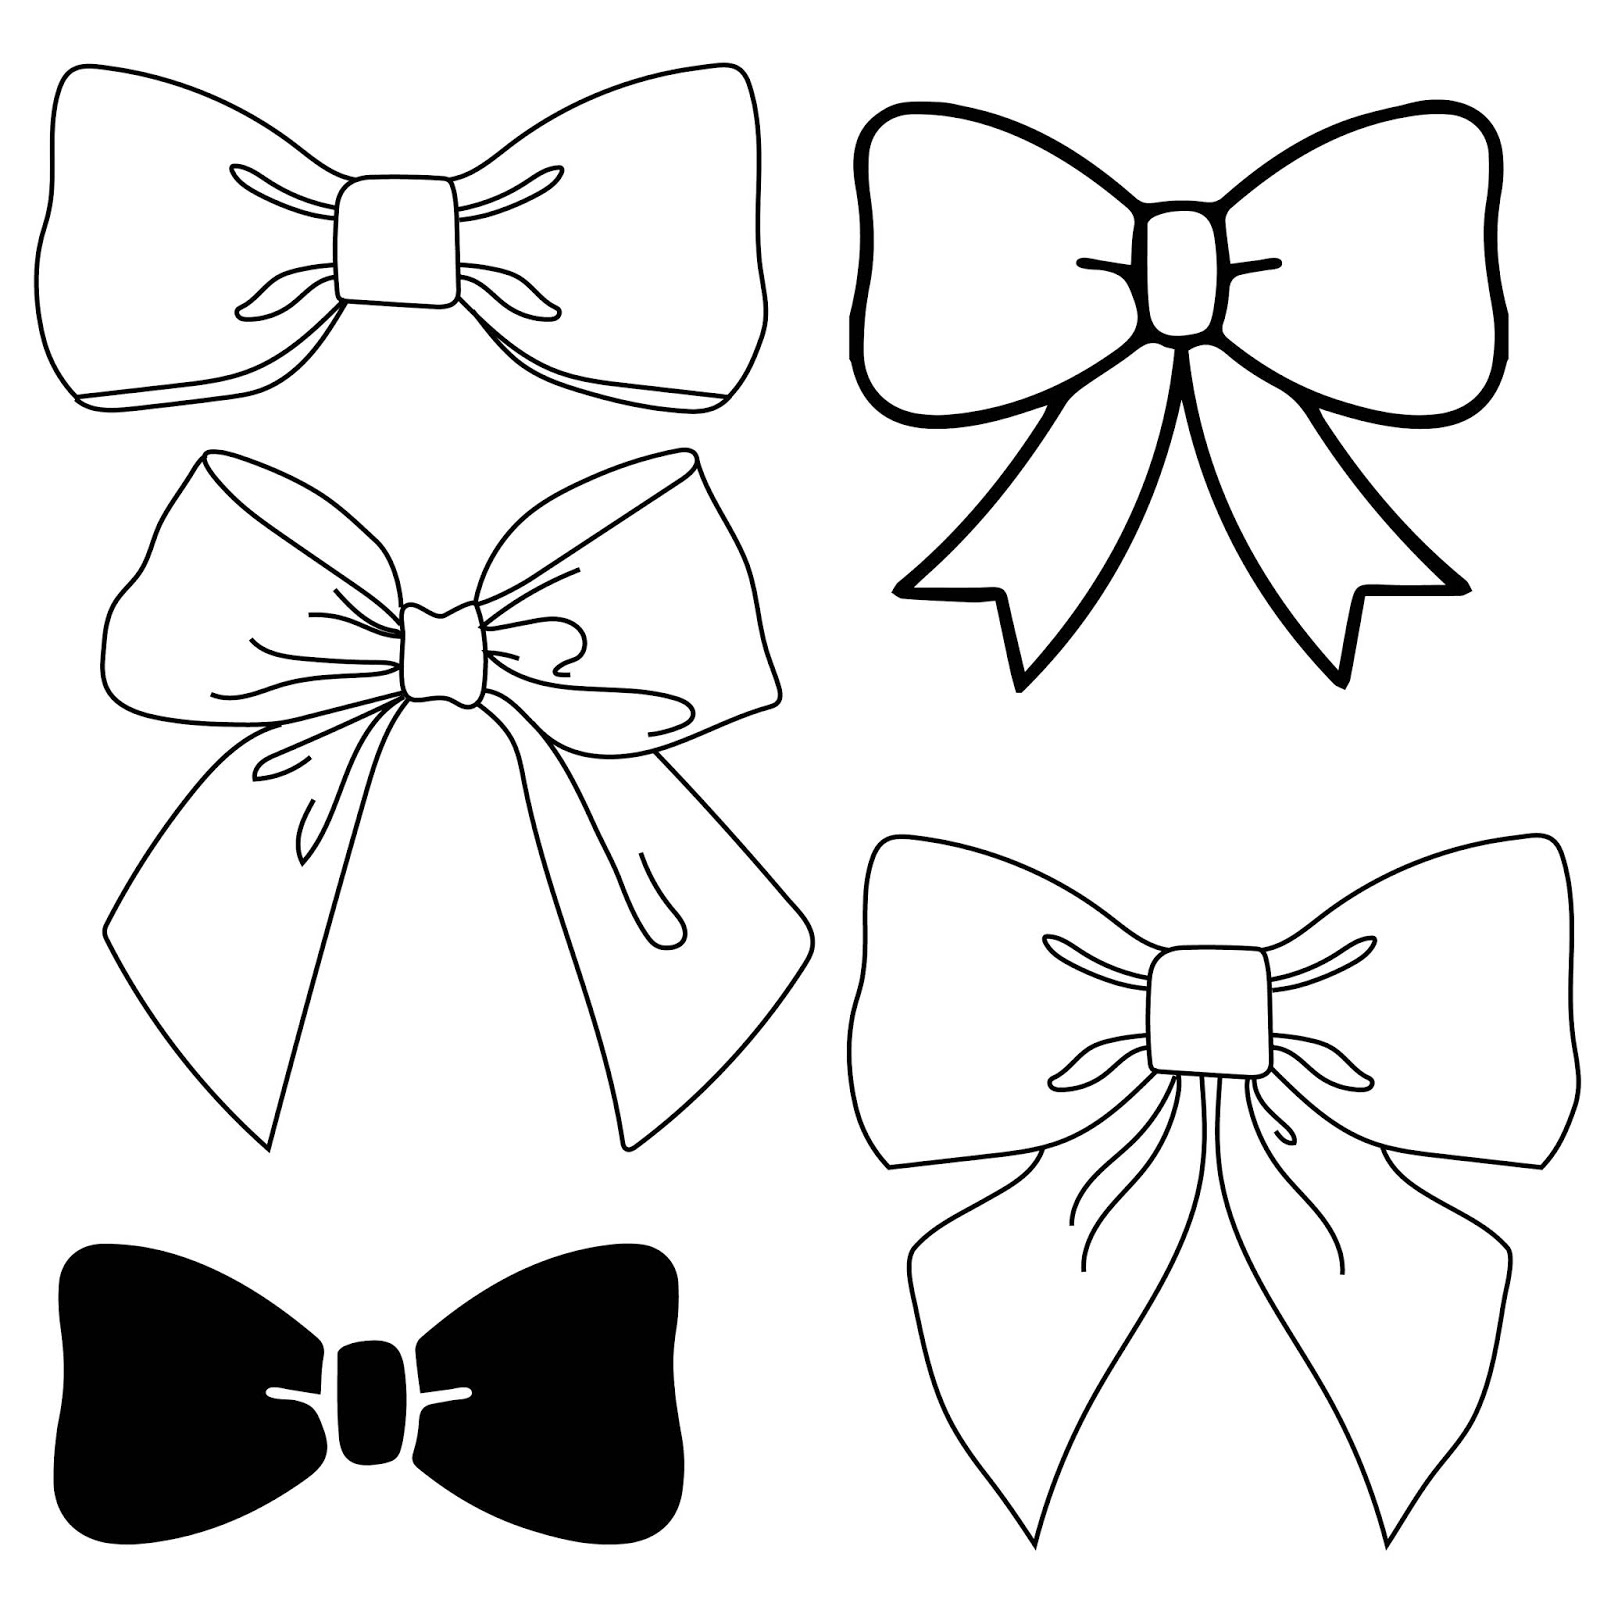 Download Free Bow Silhouette SVG DXF Cut File - Free DXF SVG ...